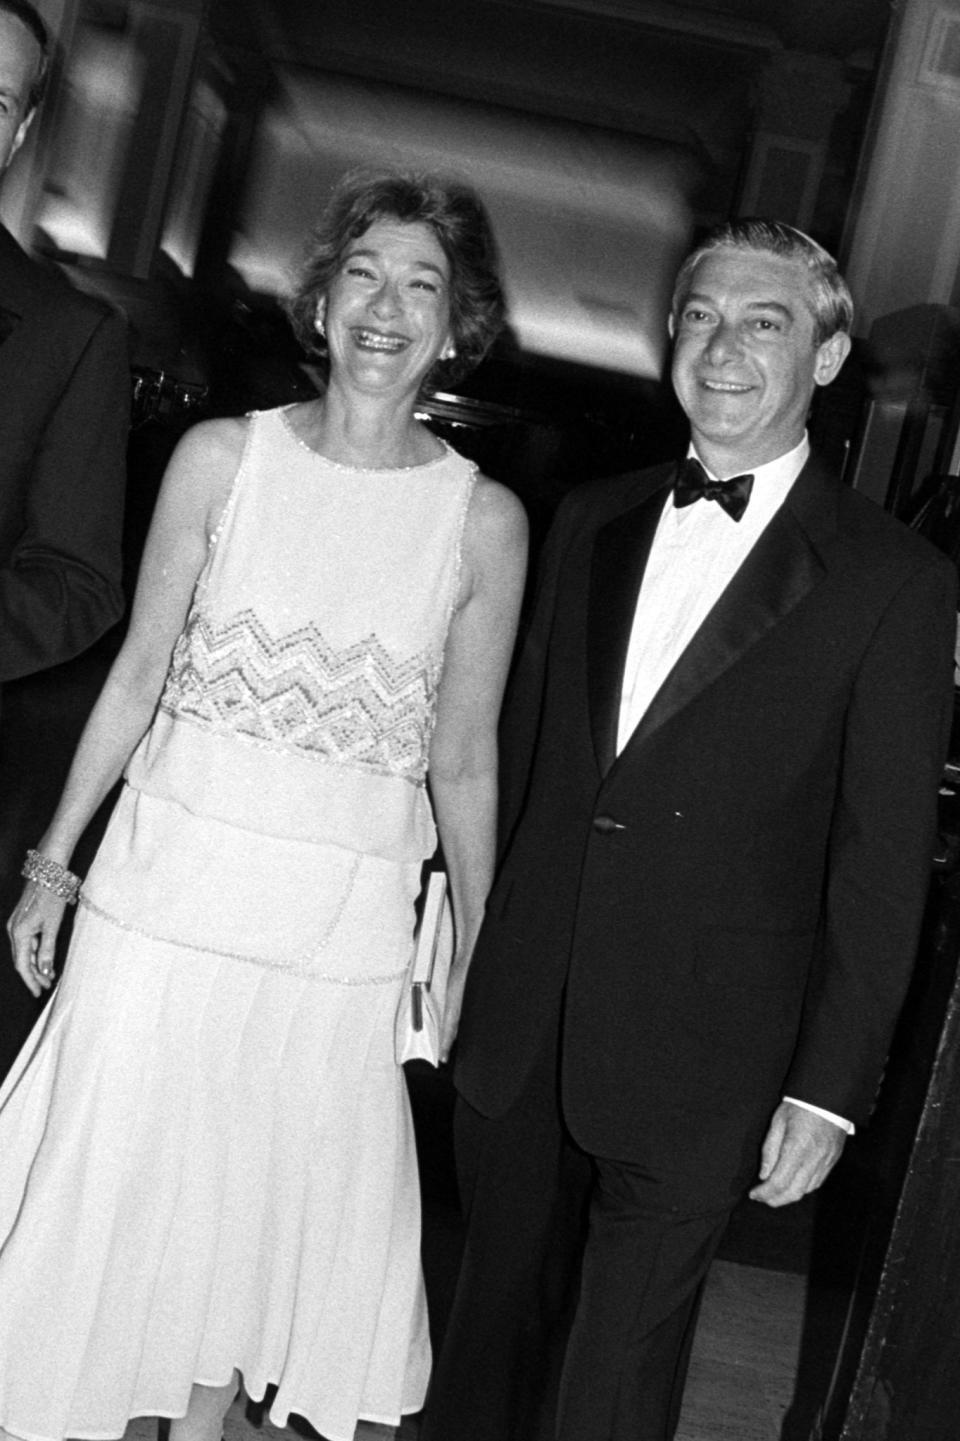 Rosalind Jacobs and Melvin Jacobs attend an event at Saks Fifth Avenue and a dinner-dance afterparty at the Museum of Modern Art, in New York City on May 24, 1984. - Credit: Tony Palmieri/WWD